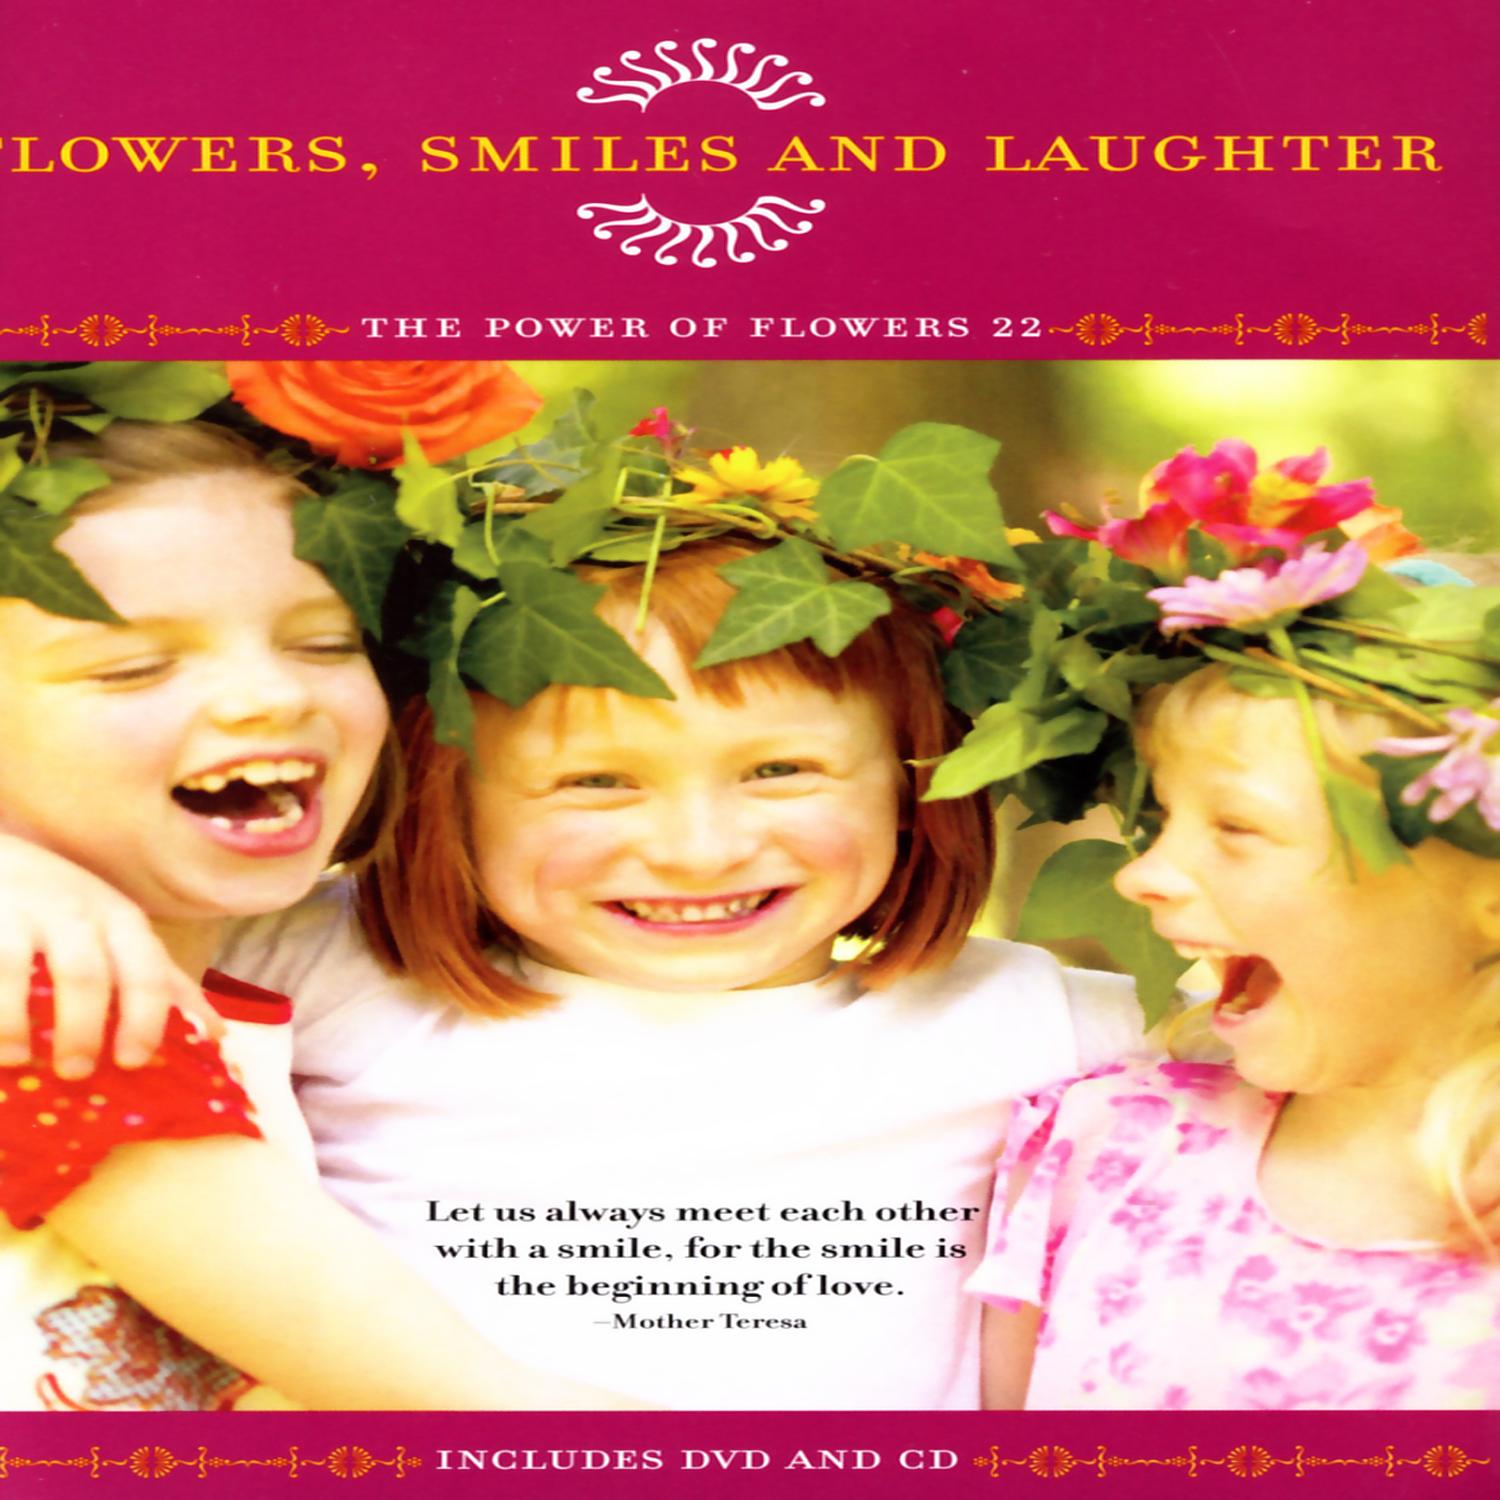 Flowers, Smiles And Laughter - The Power Of Flowers 22